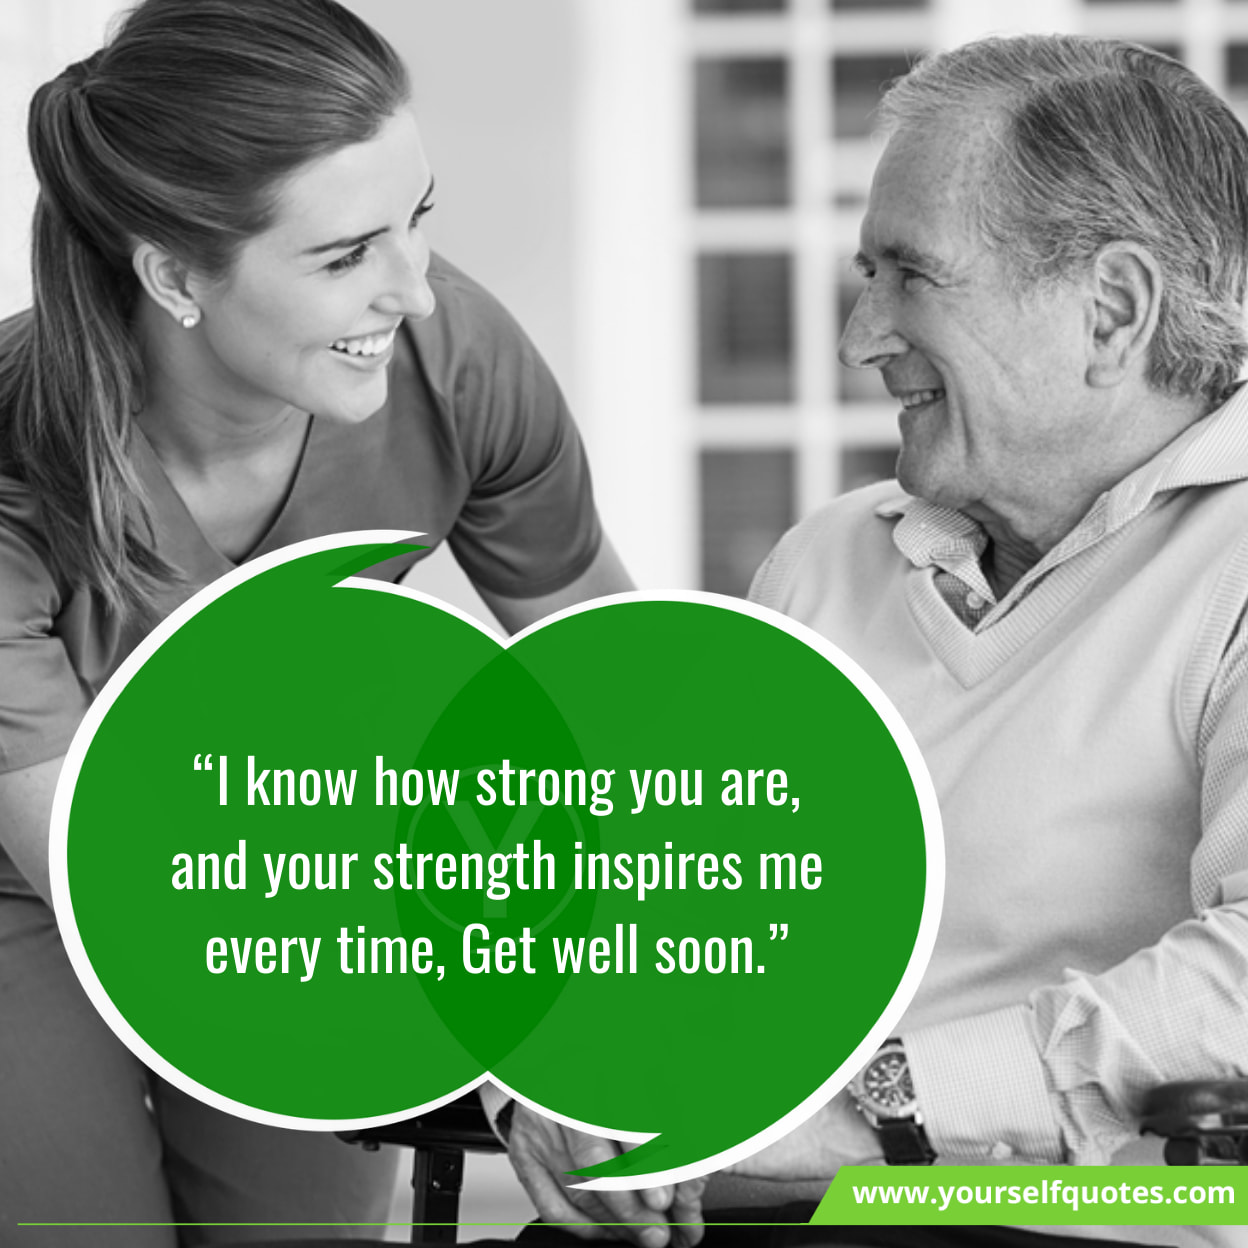 Famous Quotes On Getting Well Soon